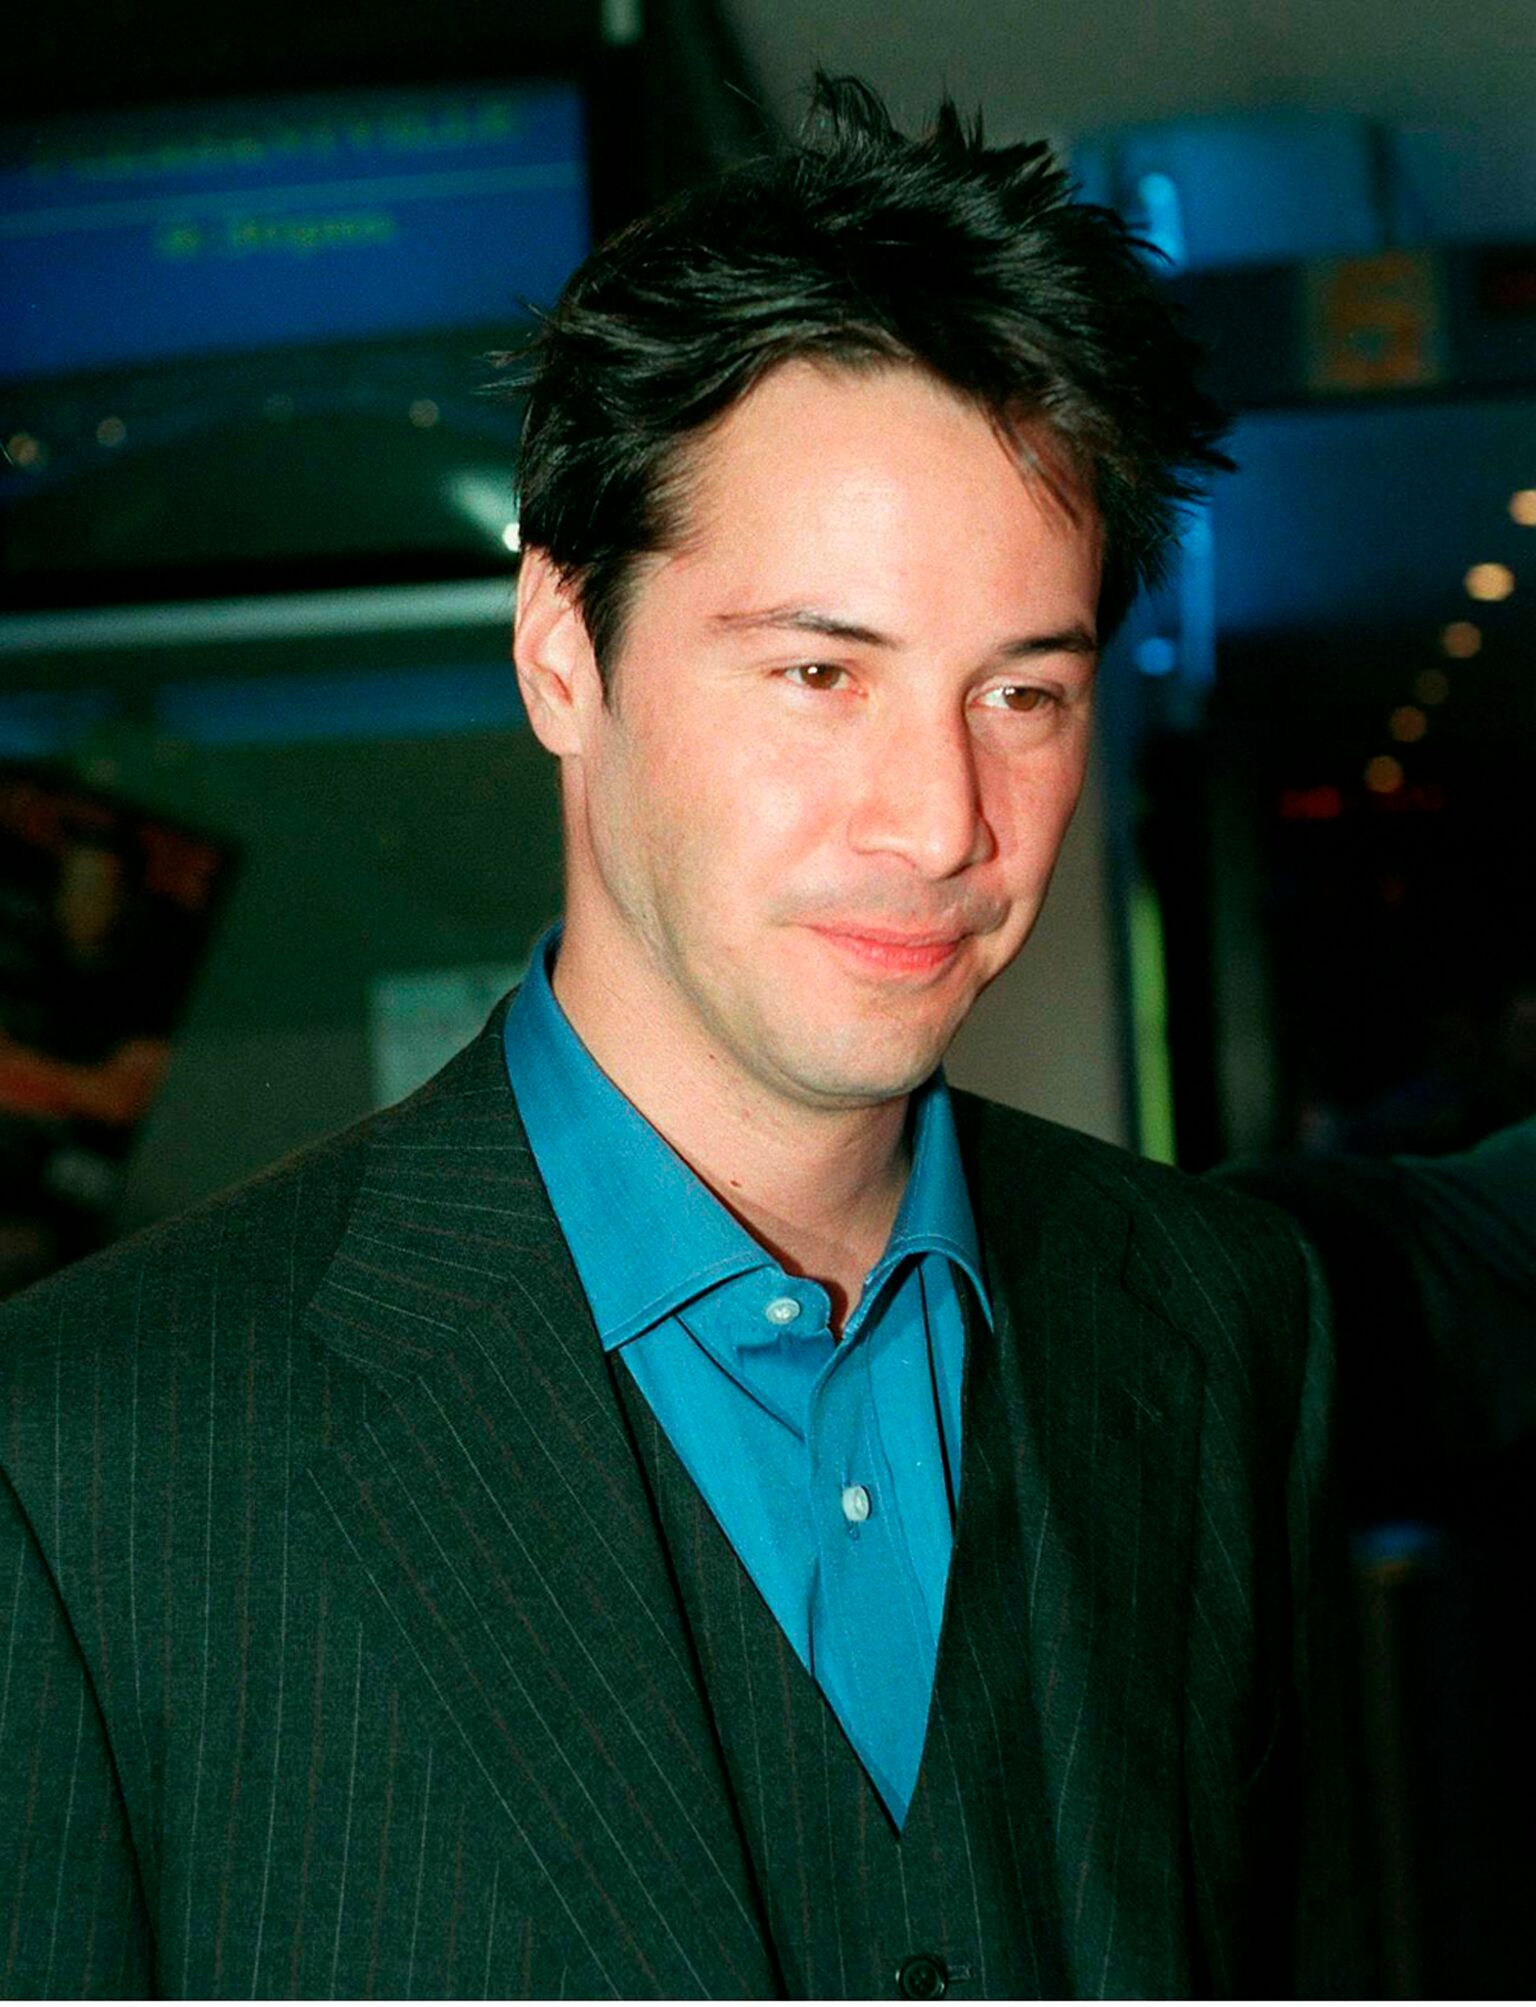 Keanu Reeves attends the Australian Premiere of The Matrix in Sydney, Australia.  | Getty Images